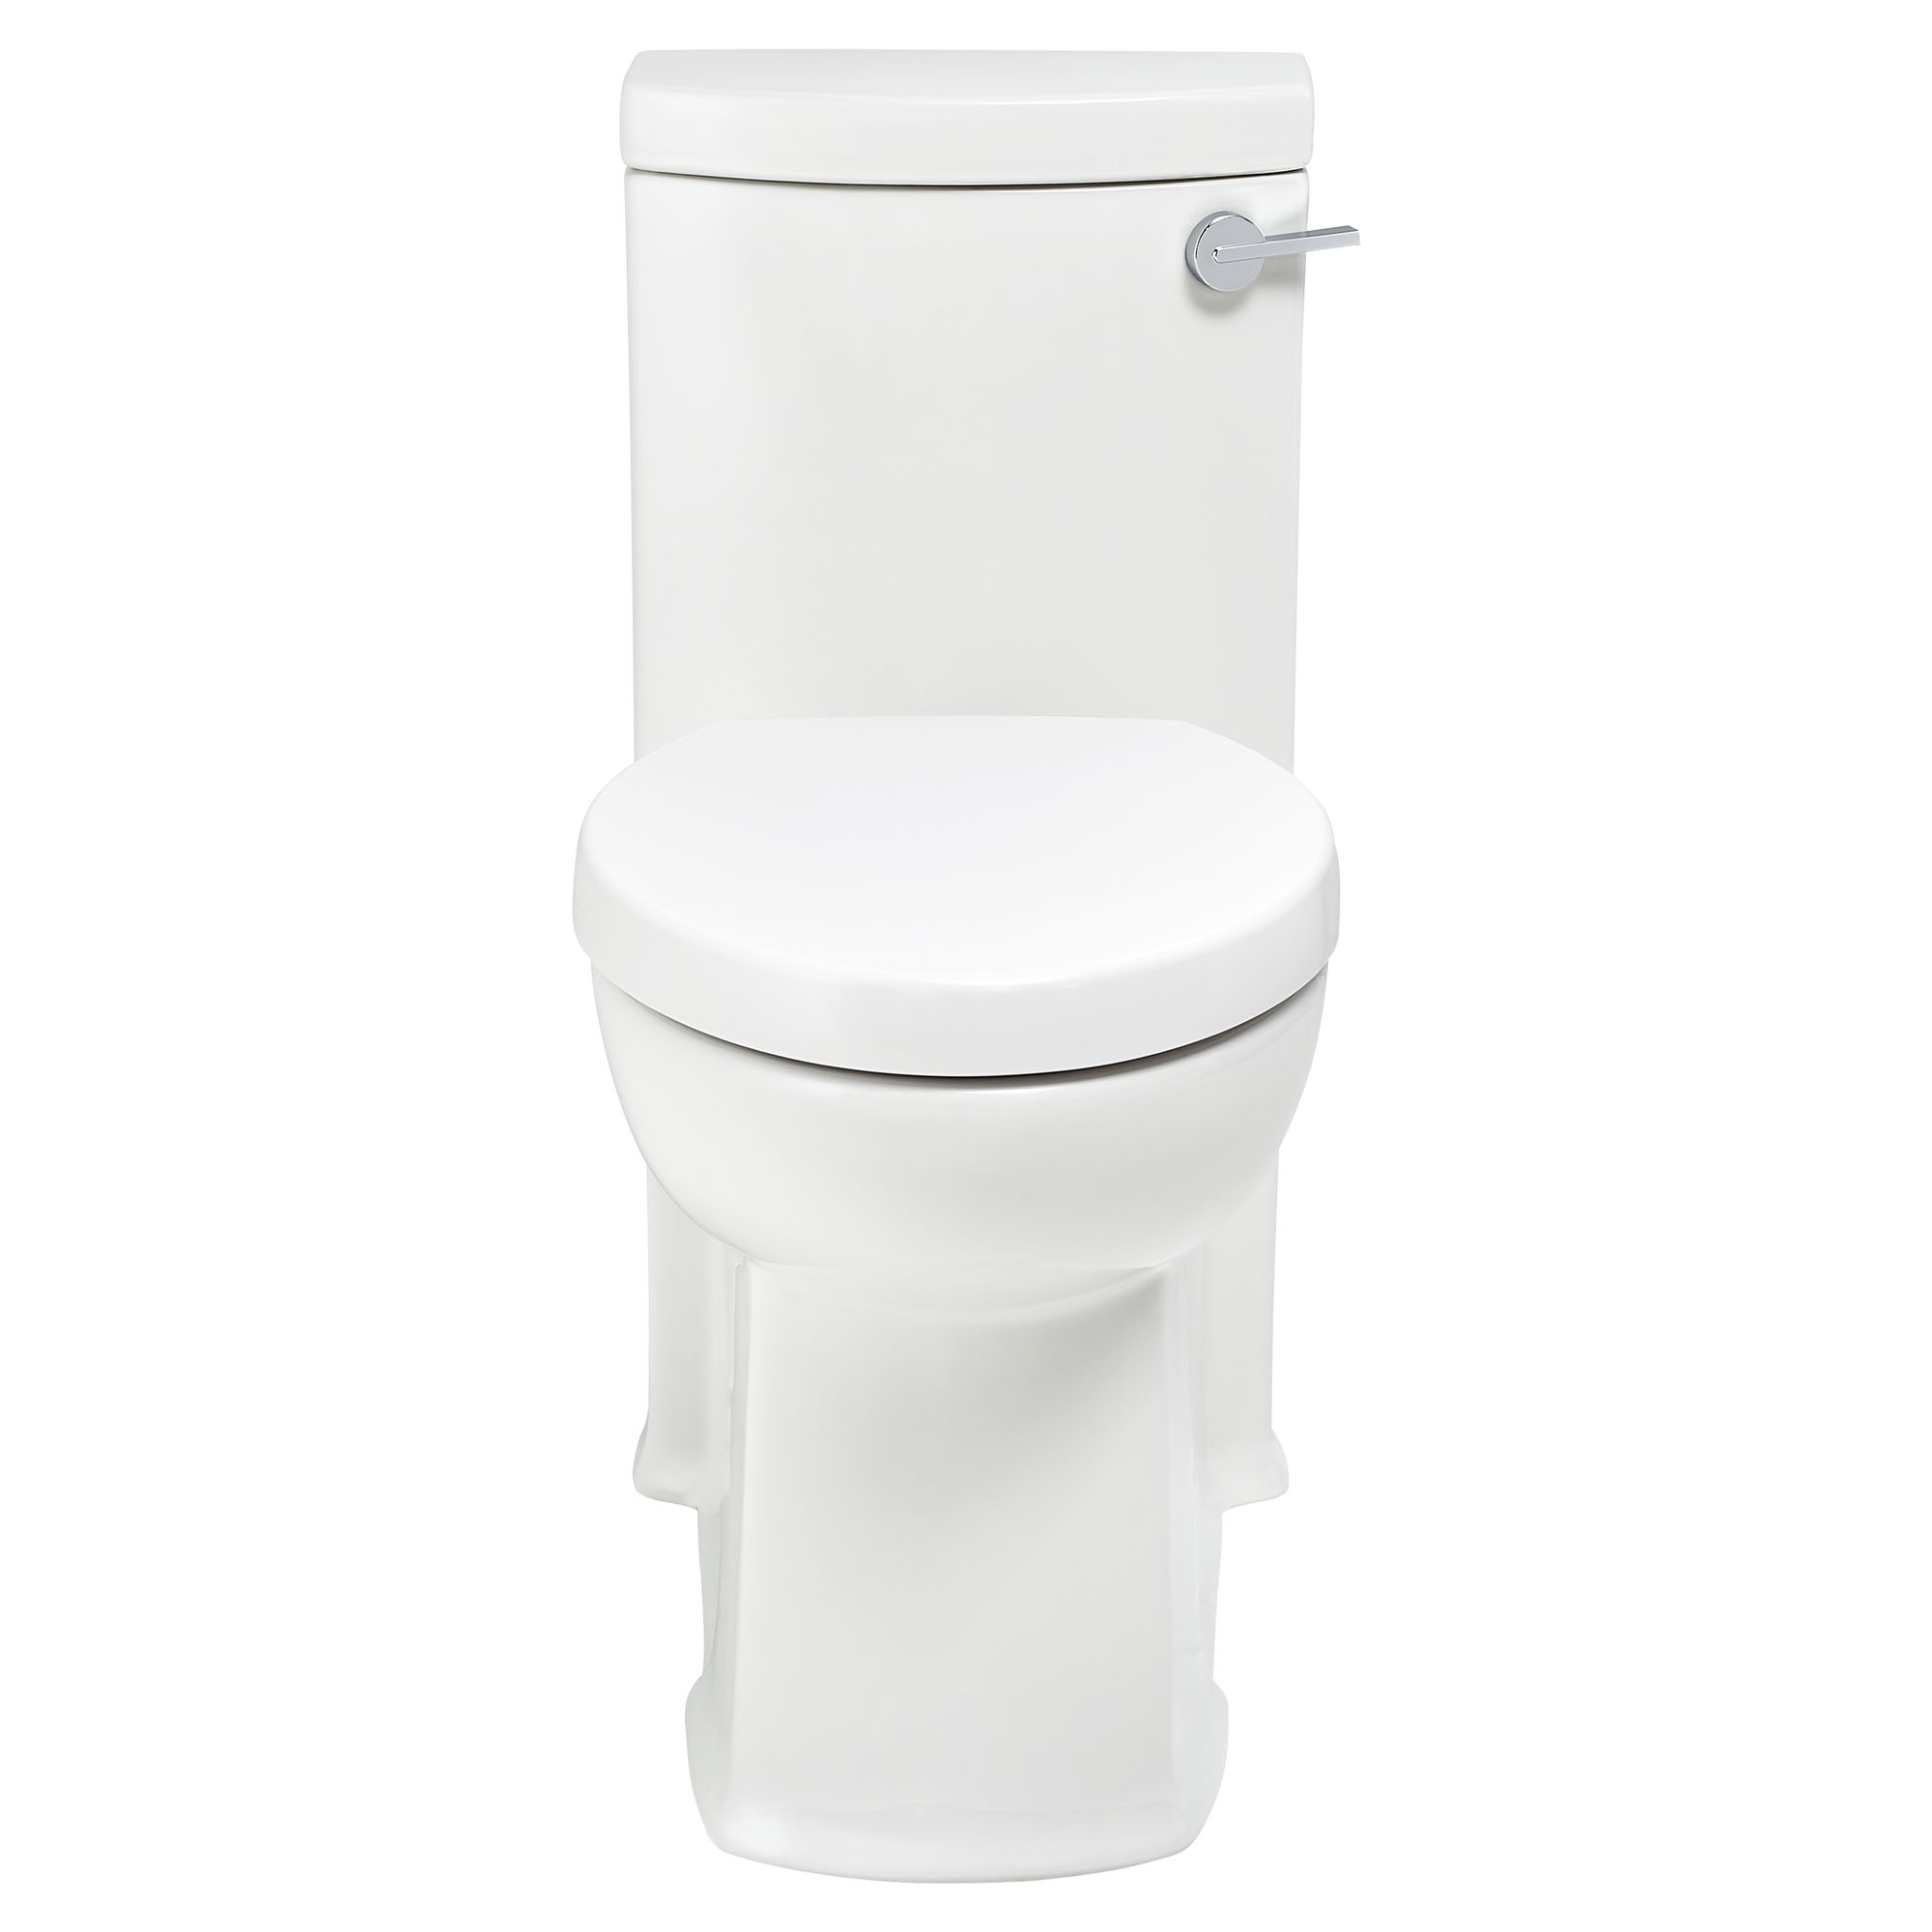 Boulevard® One-Piece 1.28 gpf/4.8 Lpf Chair Height Right-Hand Trip Lever Elongated Toilet With Seat